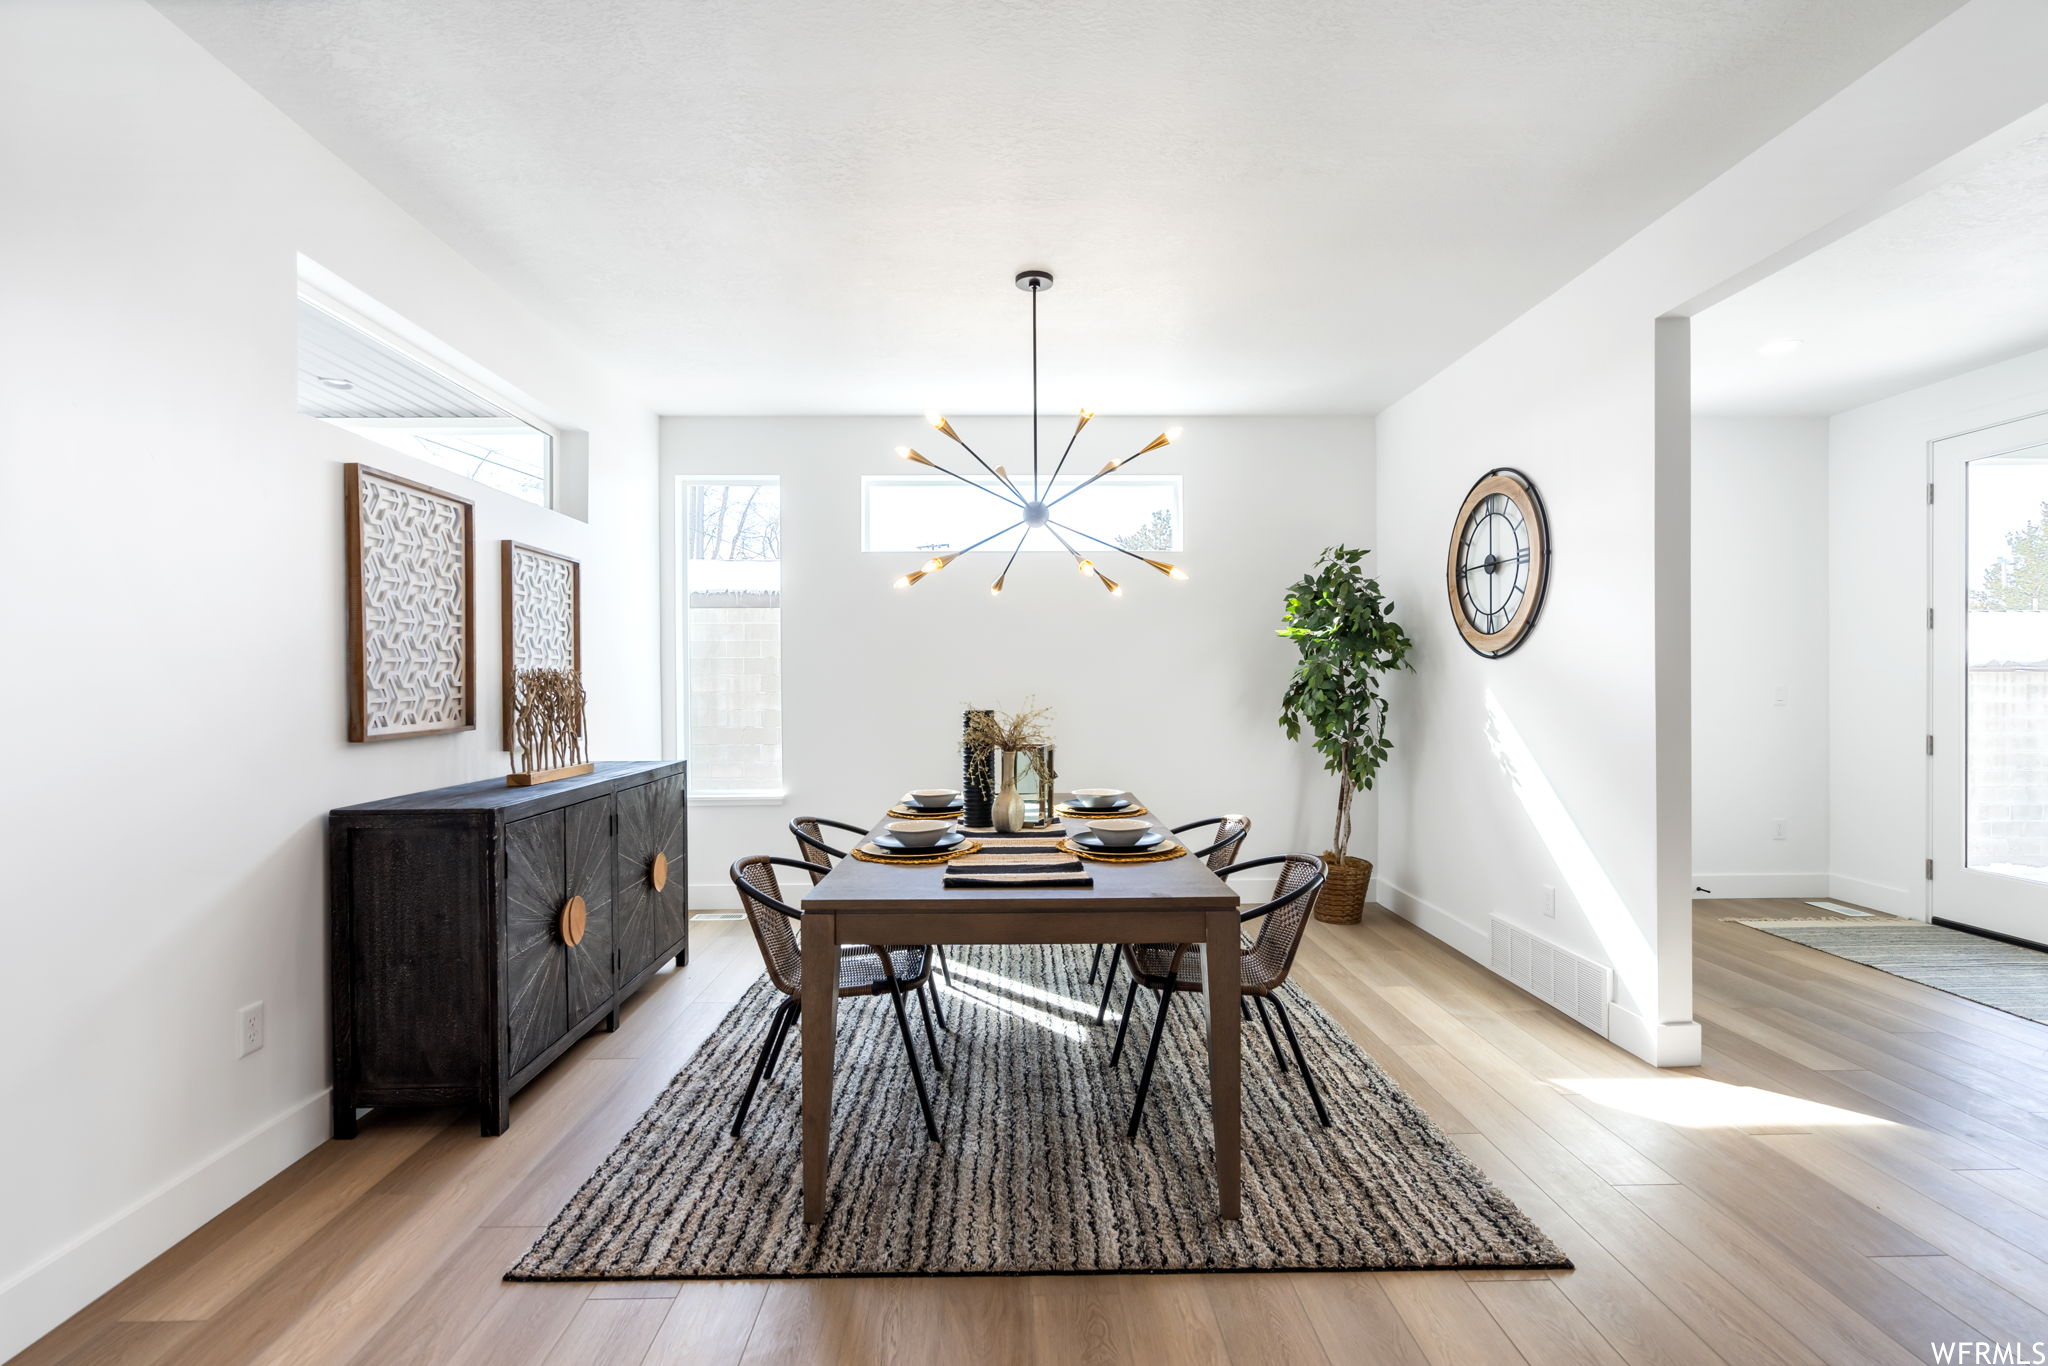 Hardwood floored dining area featuring a healthy amount of sunlight